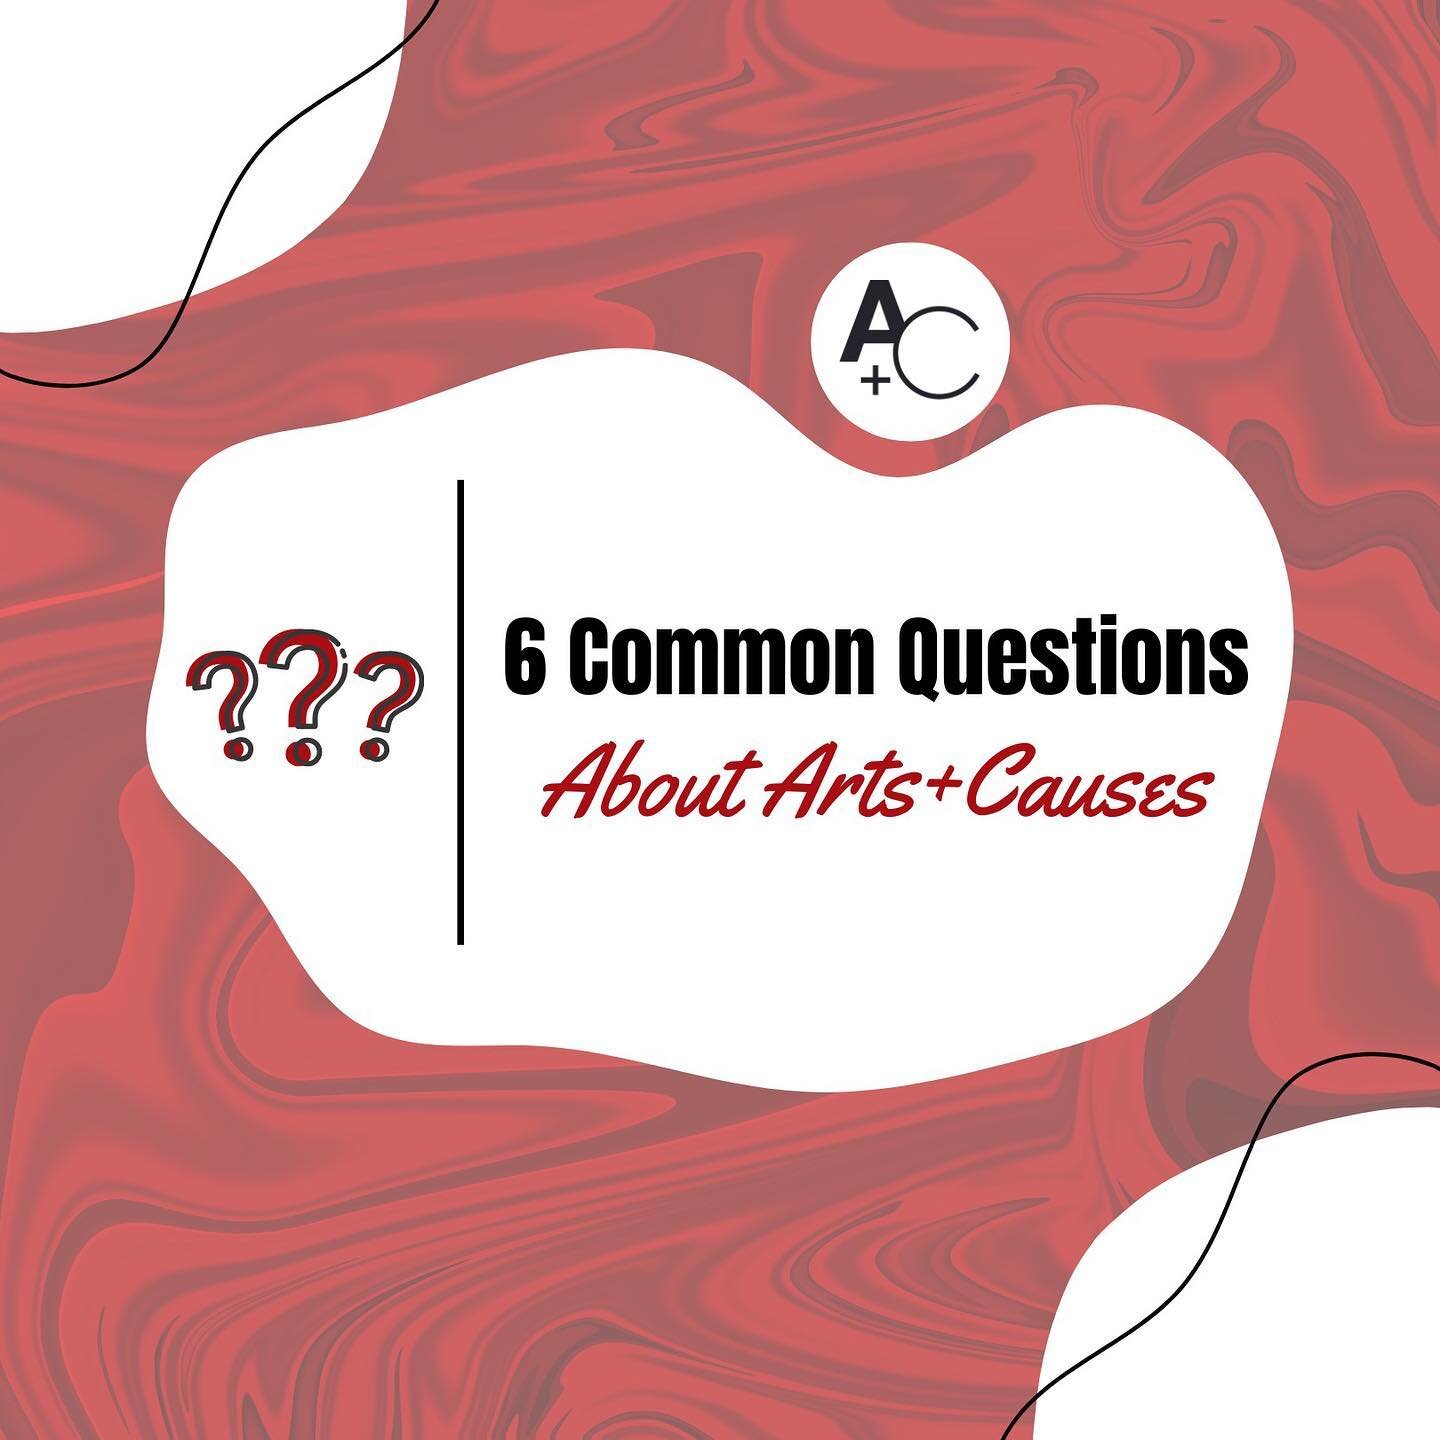 Are you interested in working with us or learning about what we do? Here are answers to 6 common questions about Arts+Causes! 

#artsandcauses #fiscalsponsorship #artforgood #supportthearts #creatives #arts